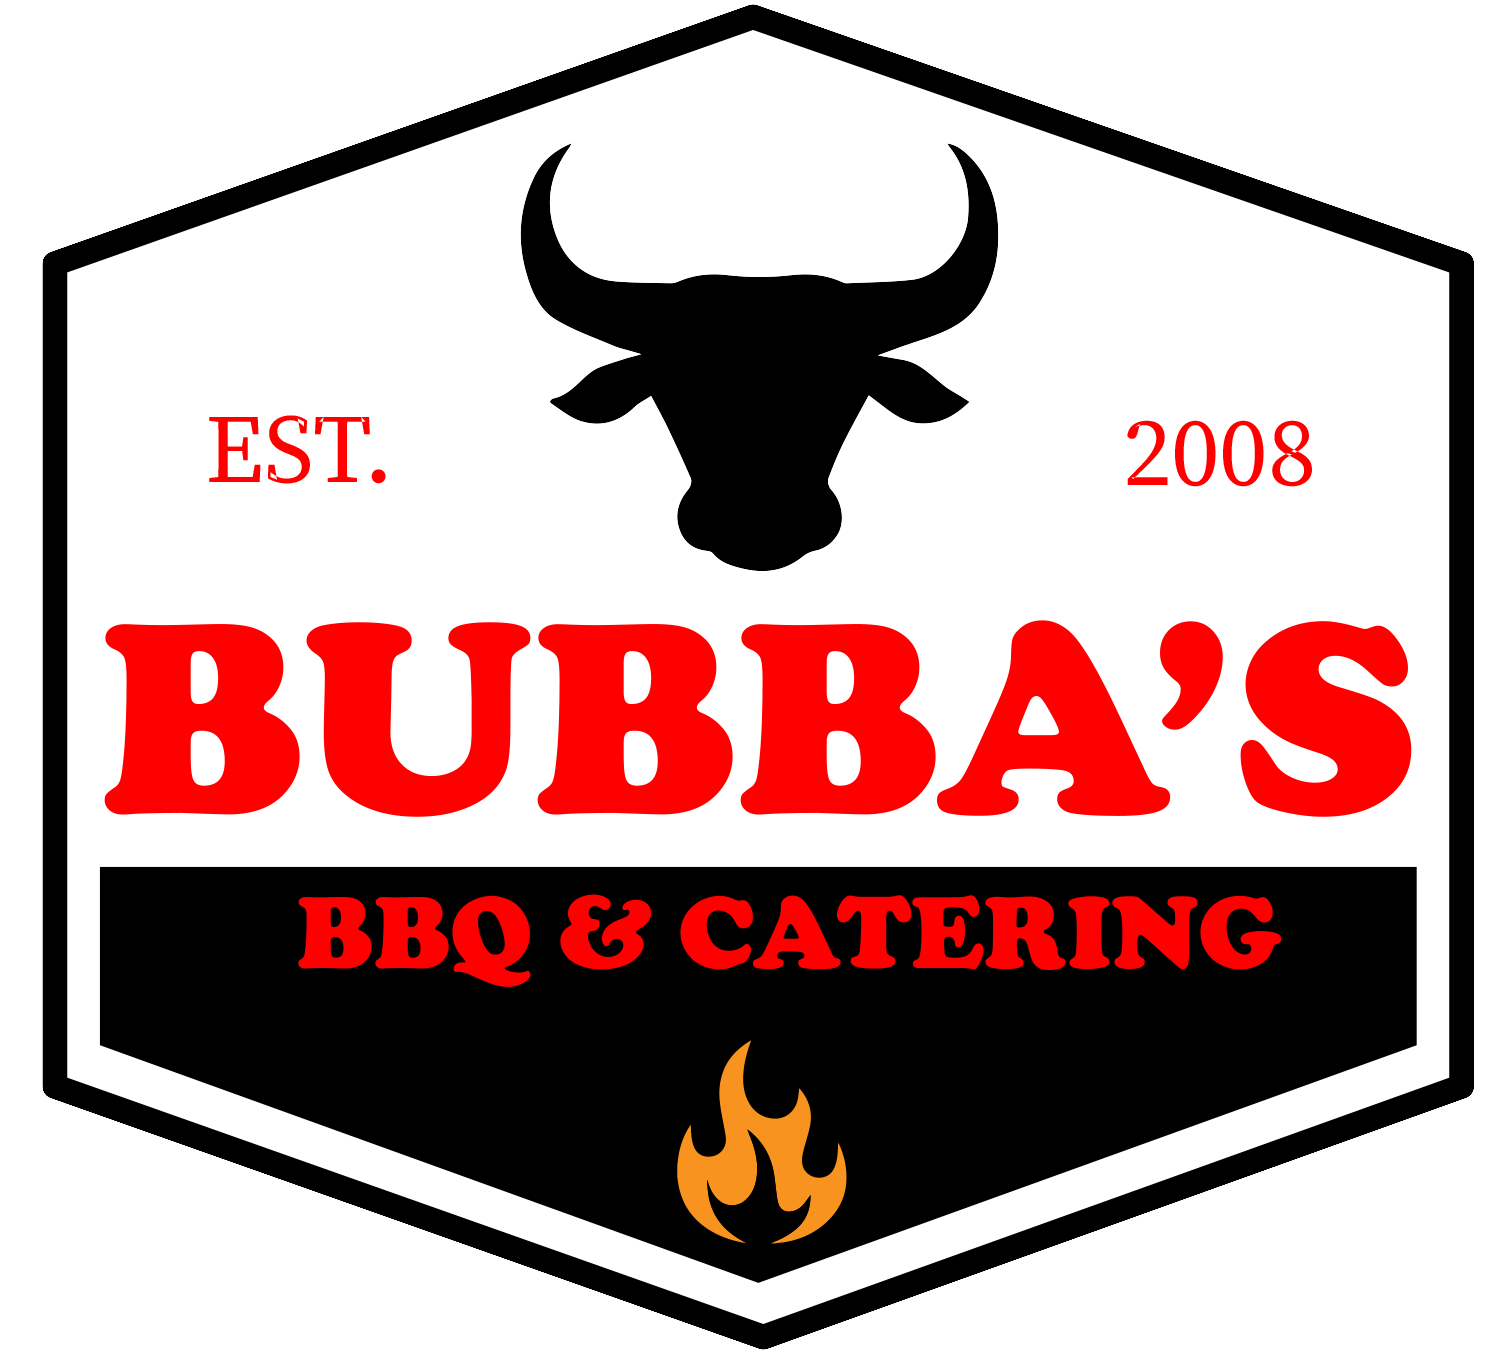 A logo for bubba 's bbq and catering